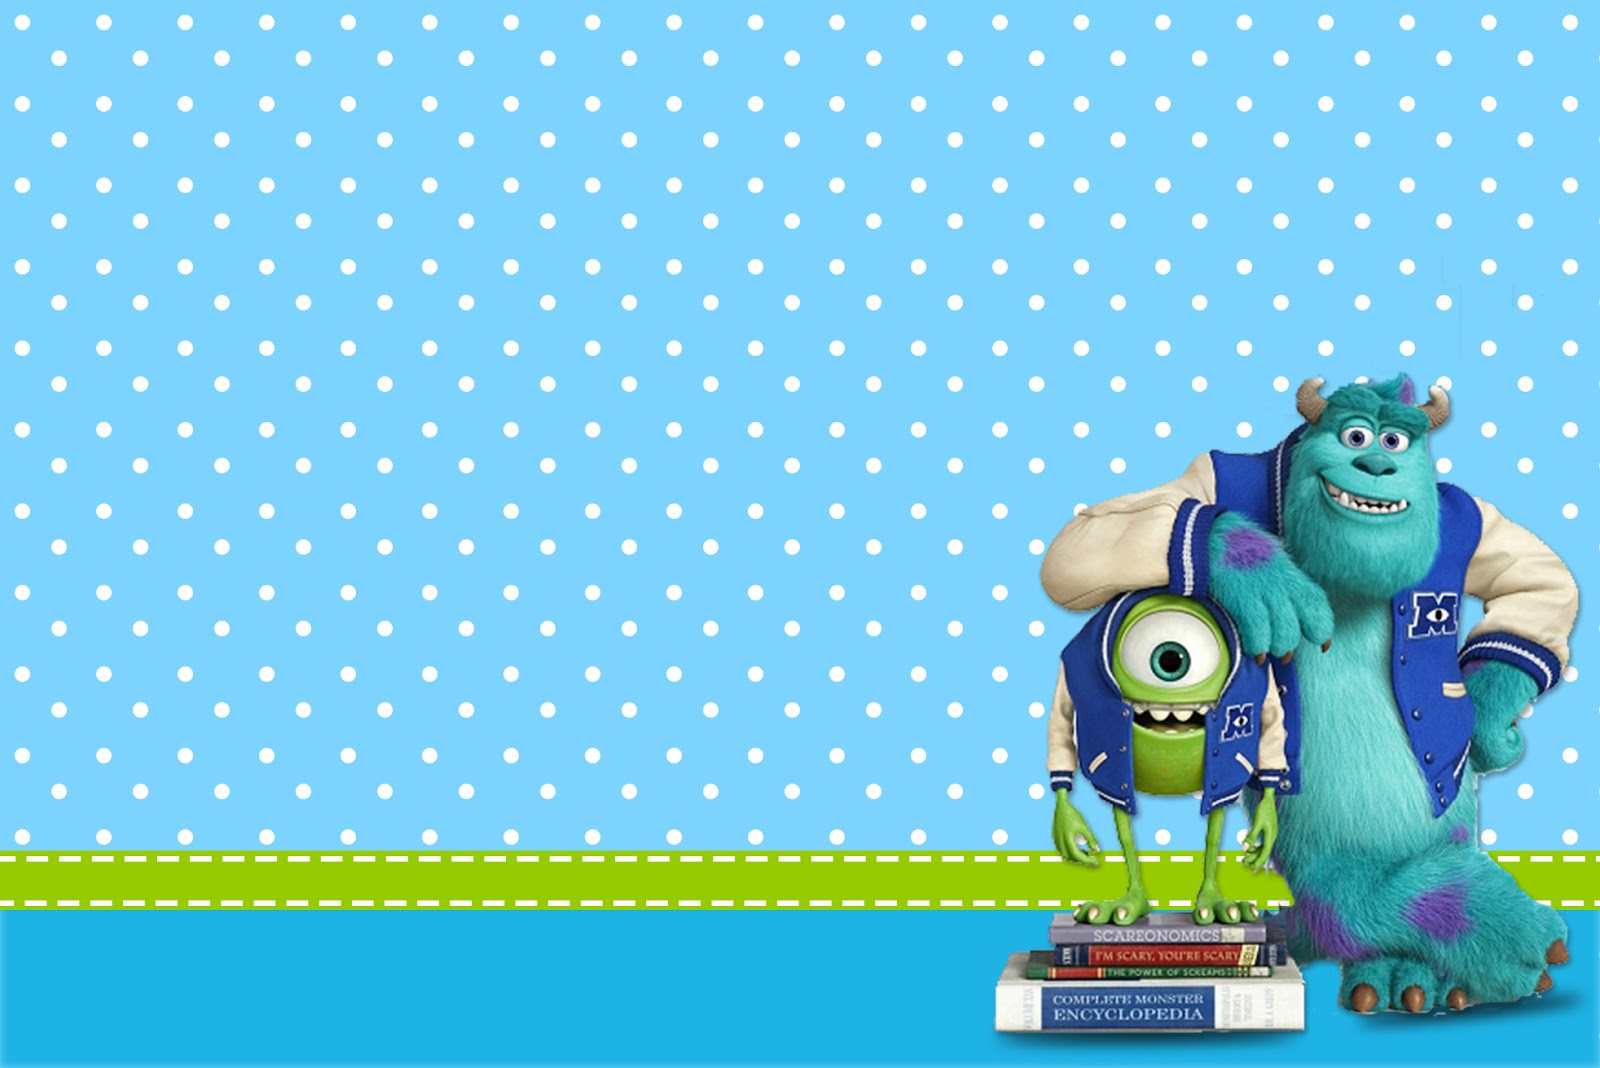 monster-university-free-printable-party-invitations-oh-my-fiesta